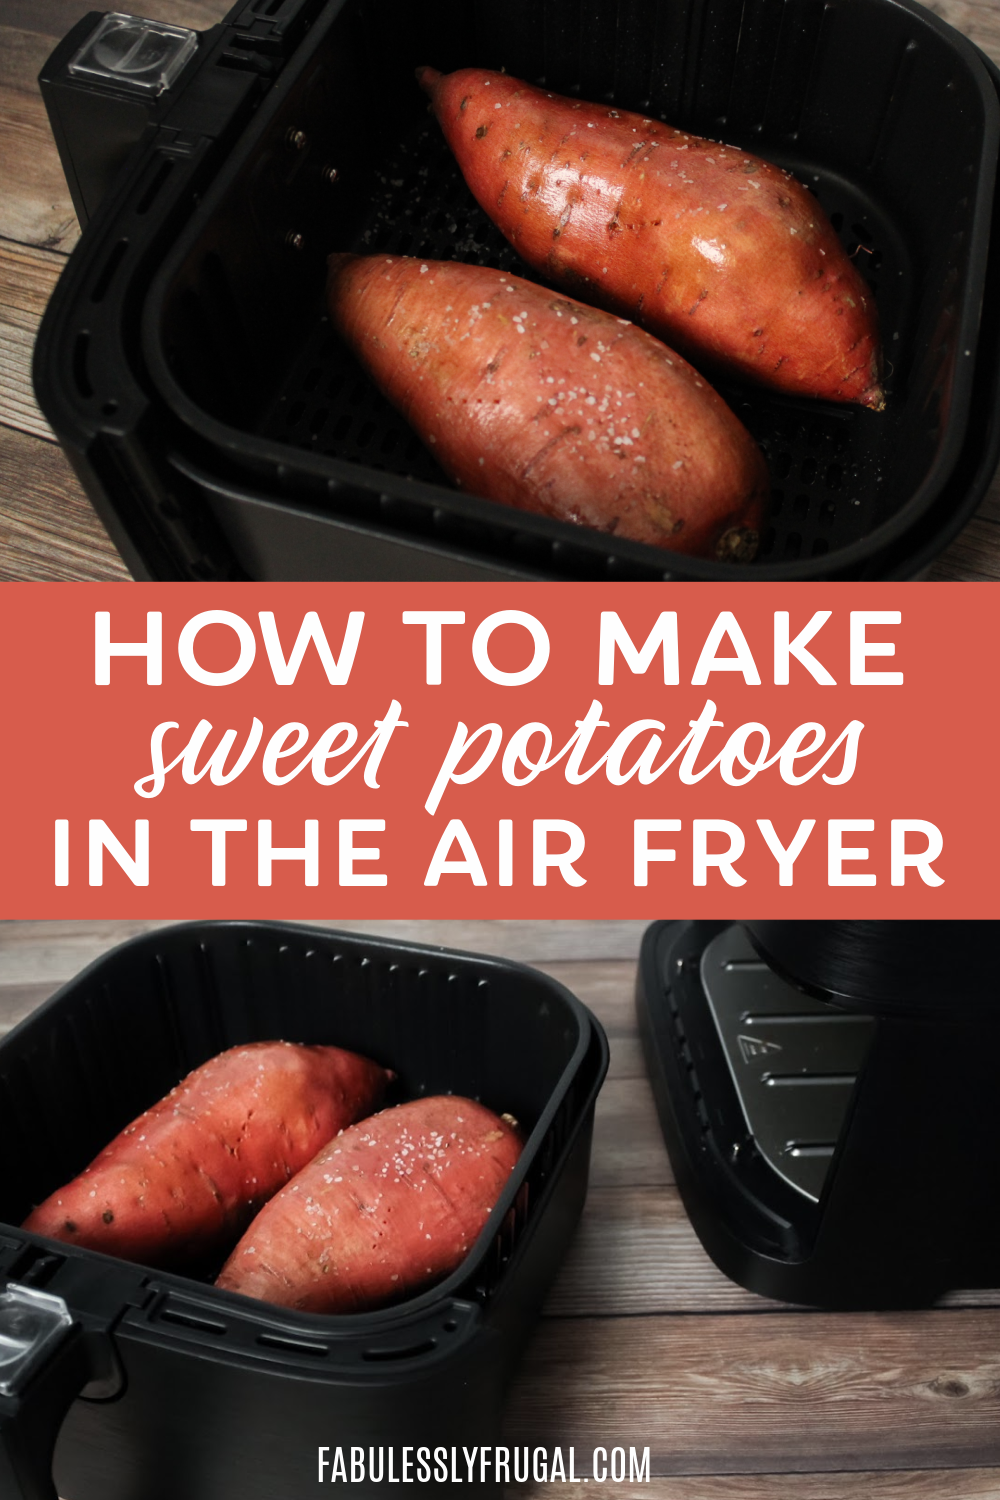 Easy Baked Sweet Potatoes in the Air Fryer Recipe - Fabulessly Frugal